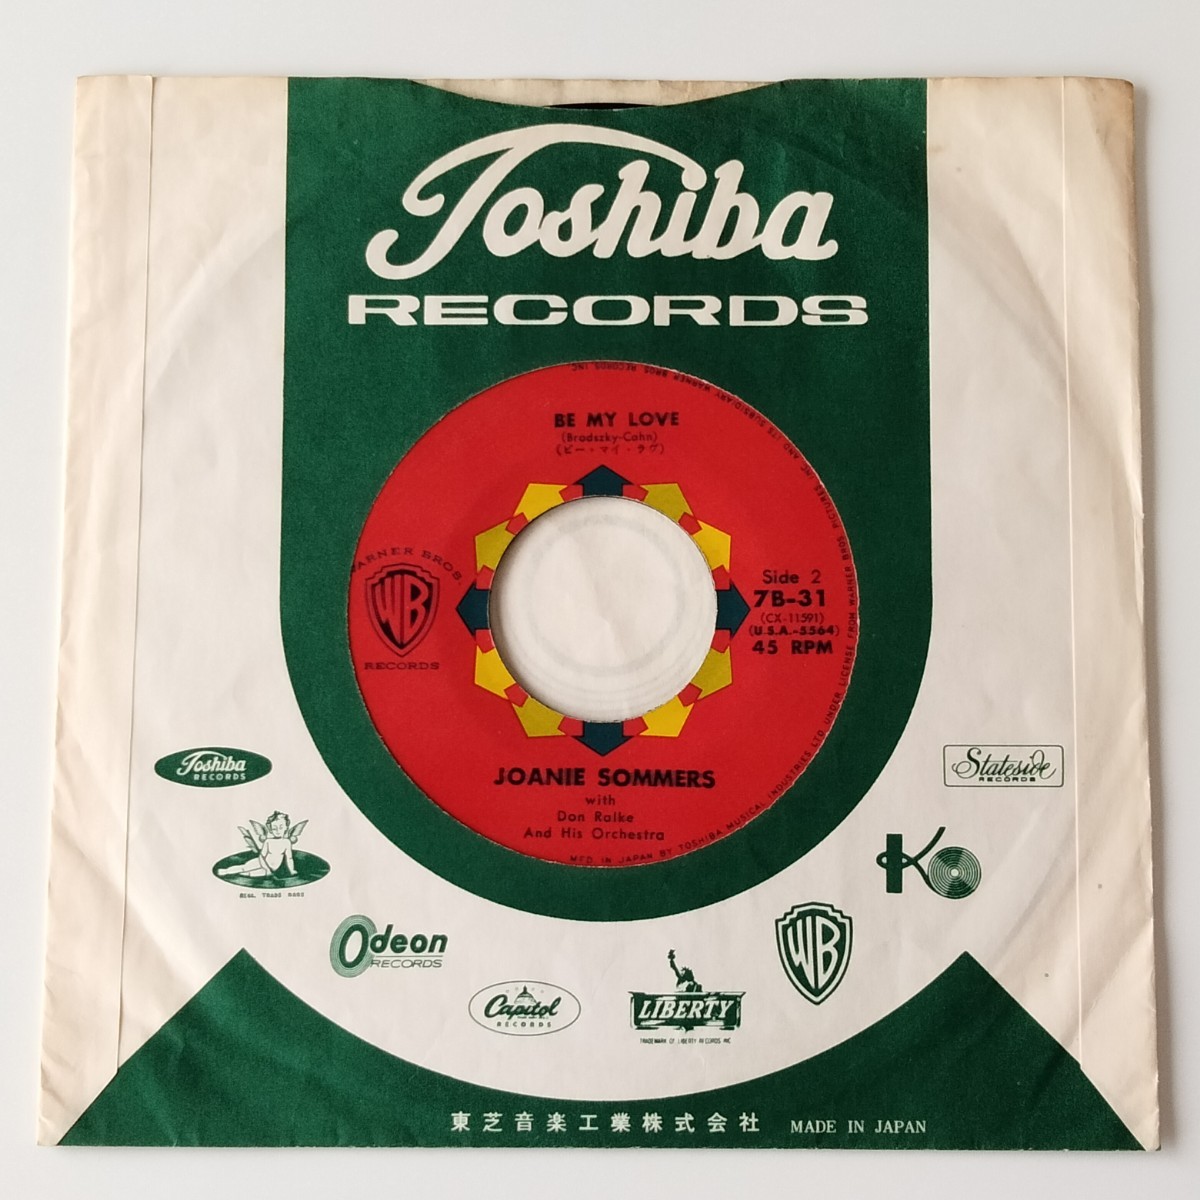 [7inch] Johnny *soma-z/.... memory Japanese record (7B-31)JOANIE SOMMERS/MEMORIES MEMORIES/ Be * my *lavu/BE MY LOVE/